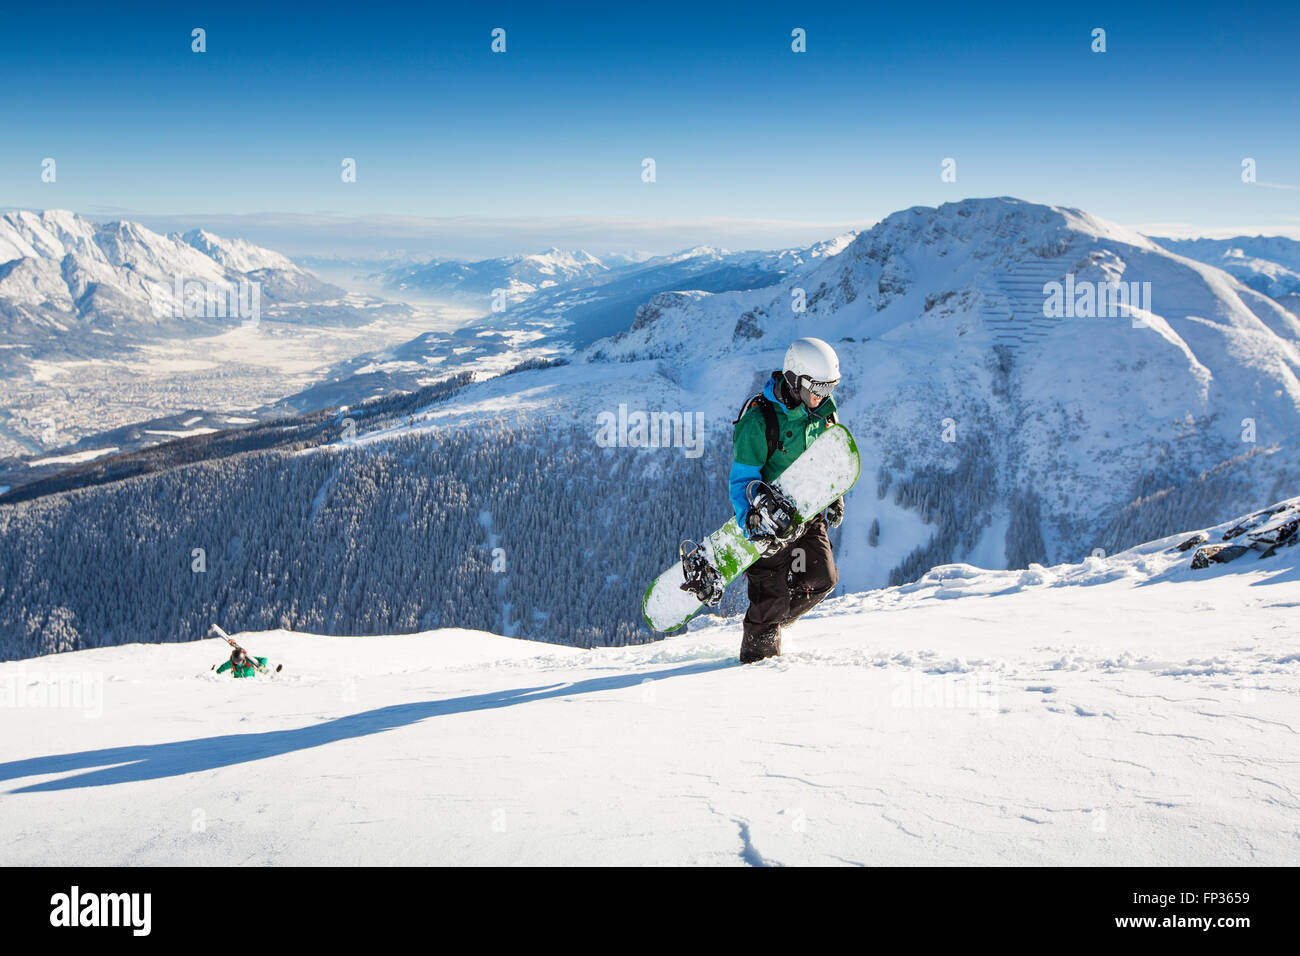 Snowboarders during the ascent overlooking Innsbruck and Inntal valley, Axamer Lizum, Tyrol, Austria Stock Photo